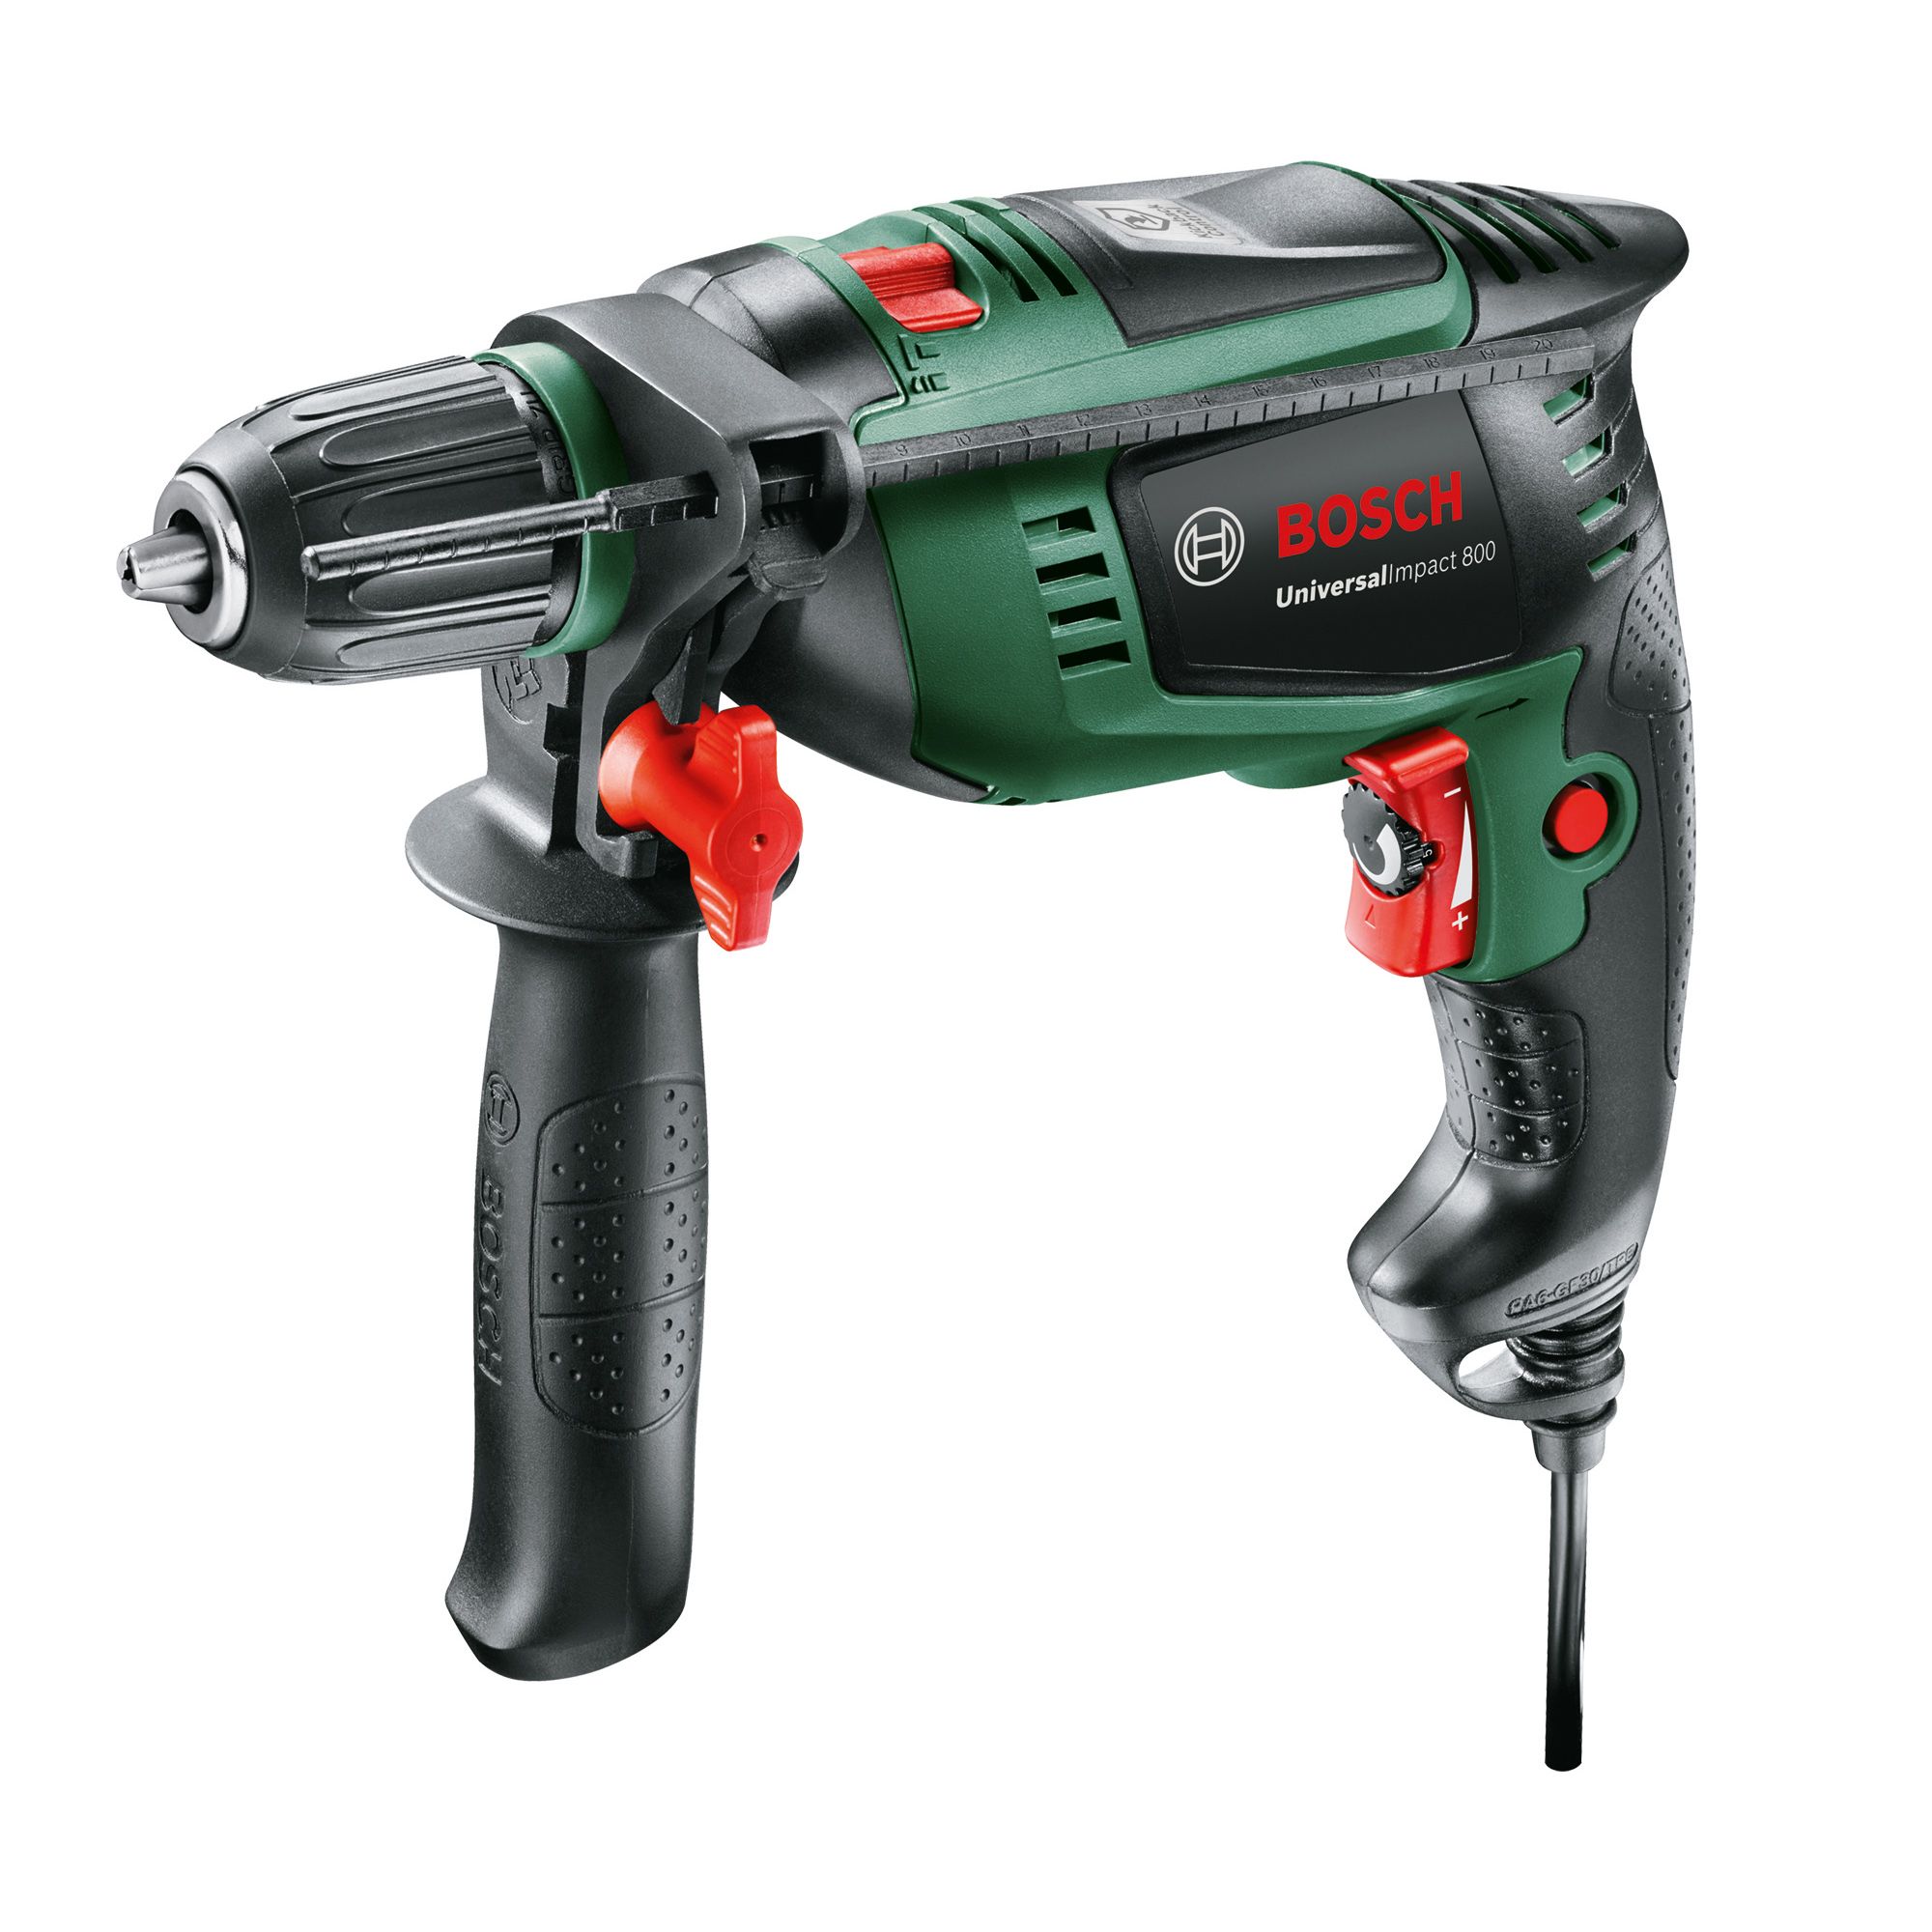 Bosch Corded Impact driver